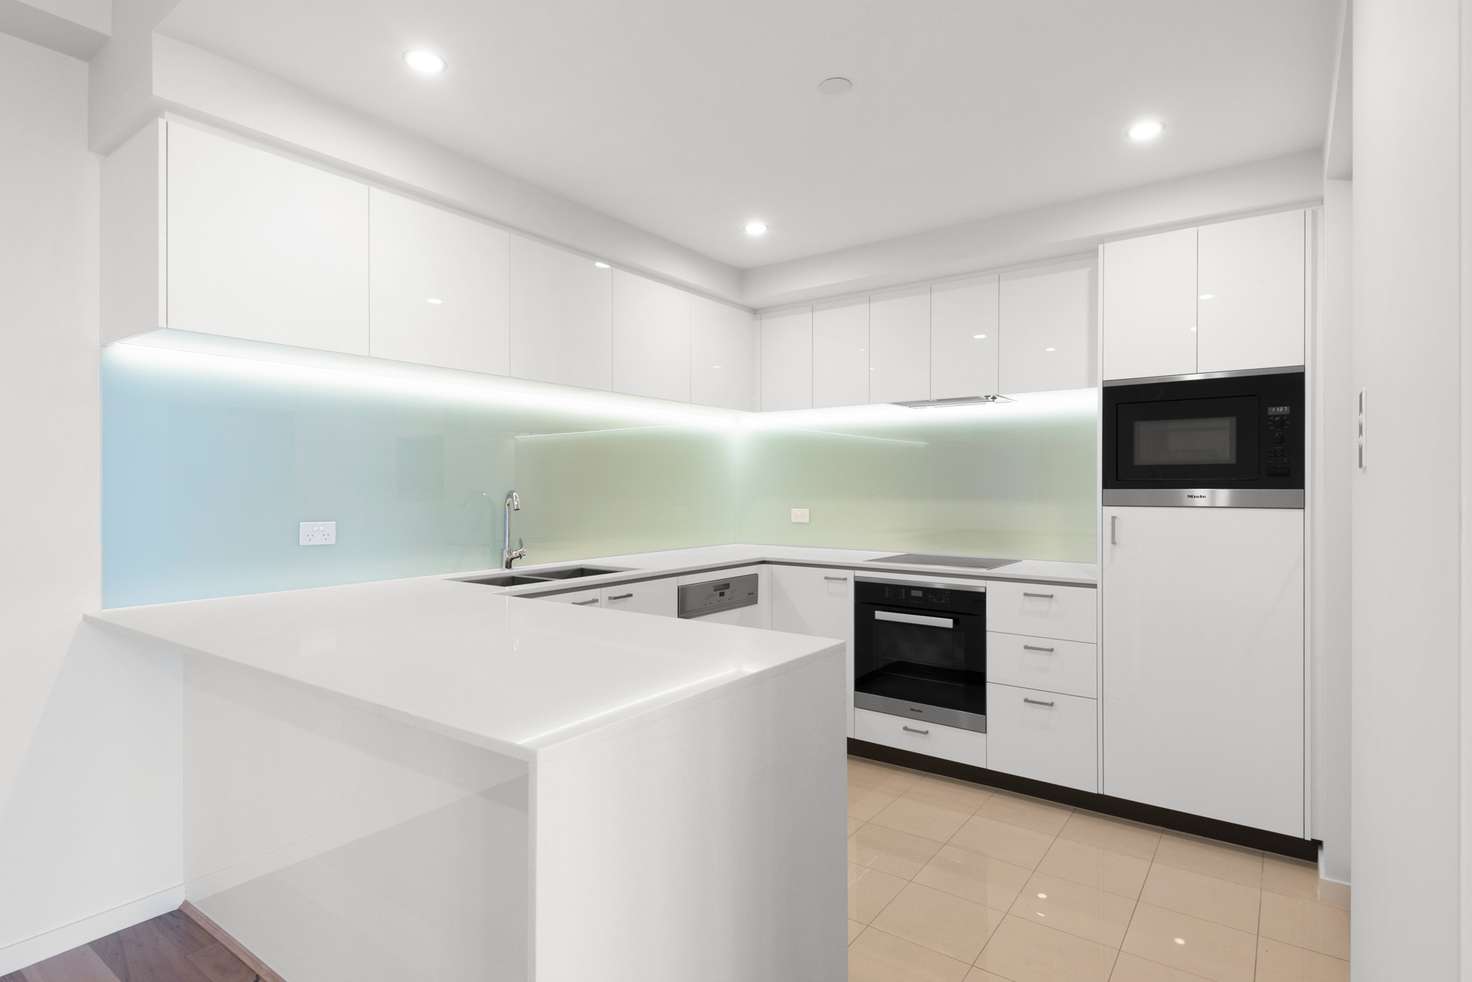 Main view of Homely apartment listing, 148/189 Adelaide Terrace, East Perth WA 6004